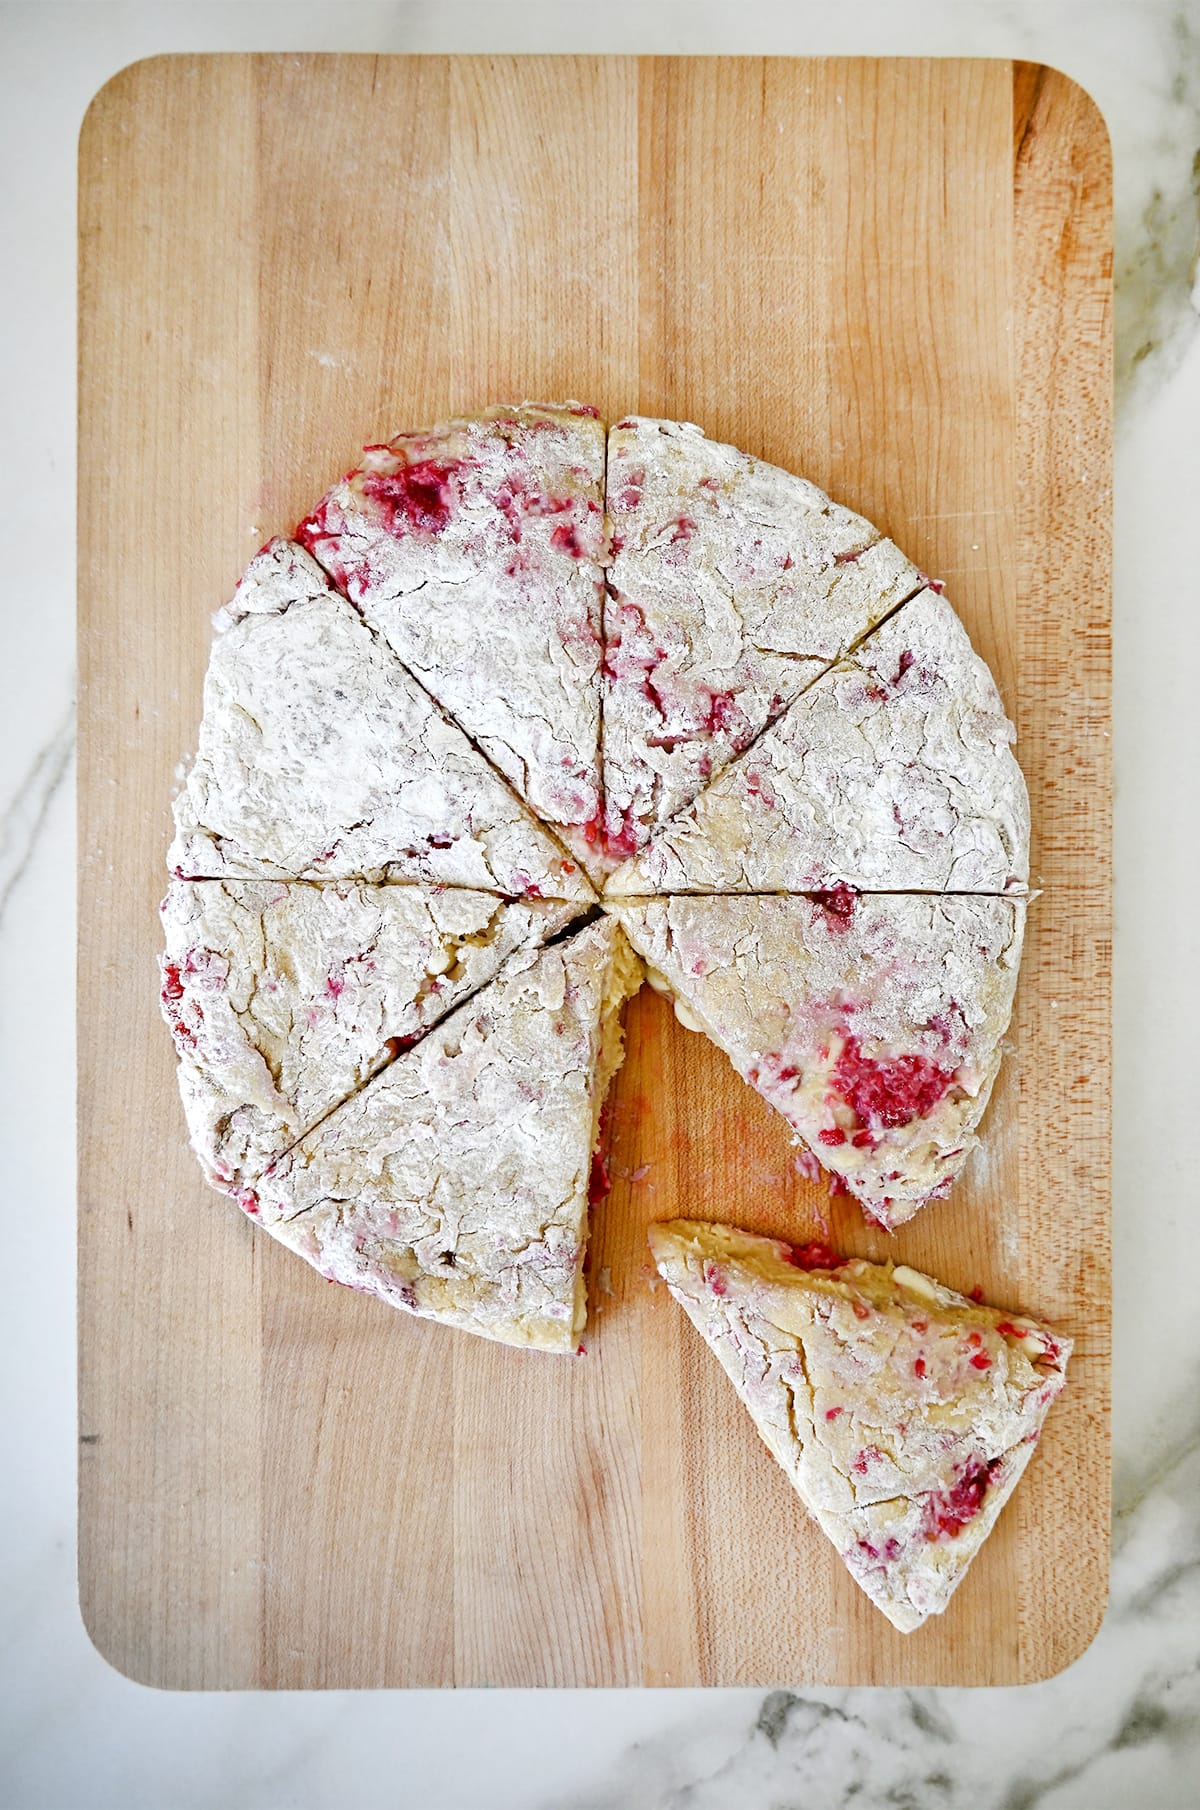 A disc of dough studded with white chocolate and raspberries cut into 8 wedges on a cutting board.